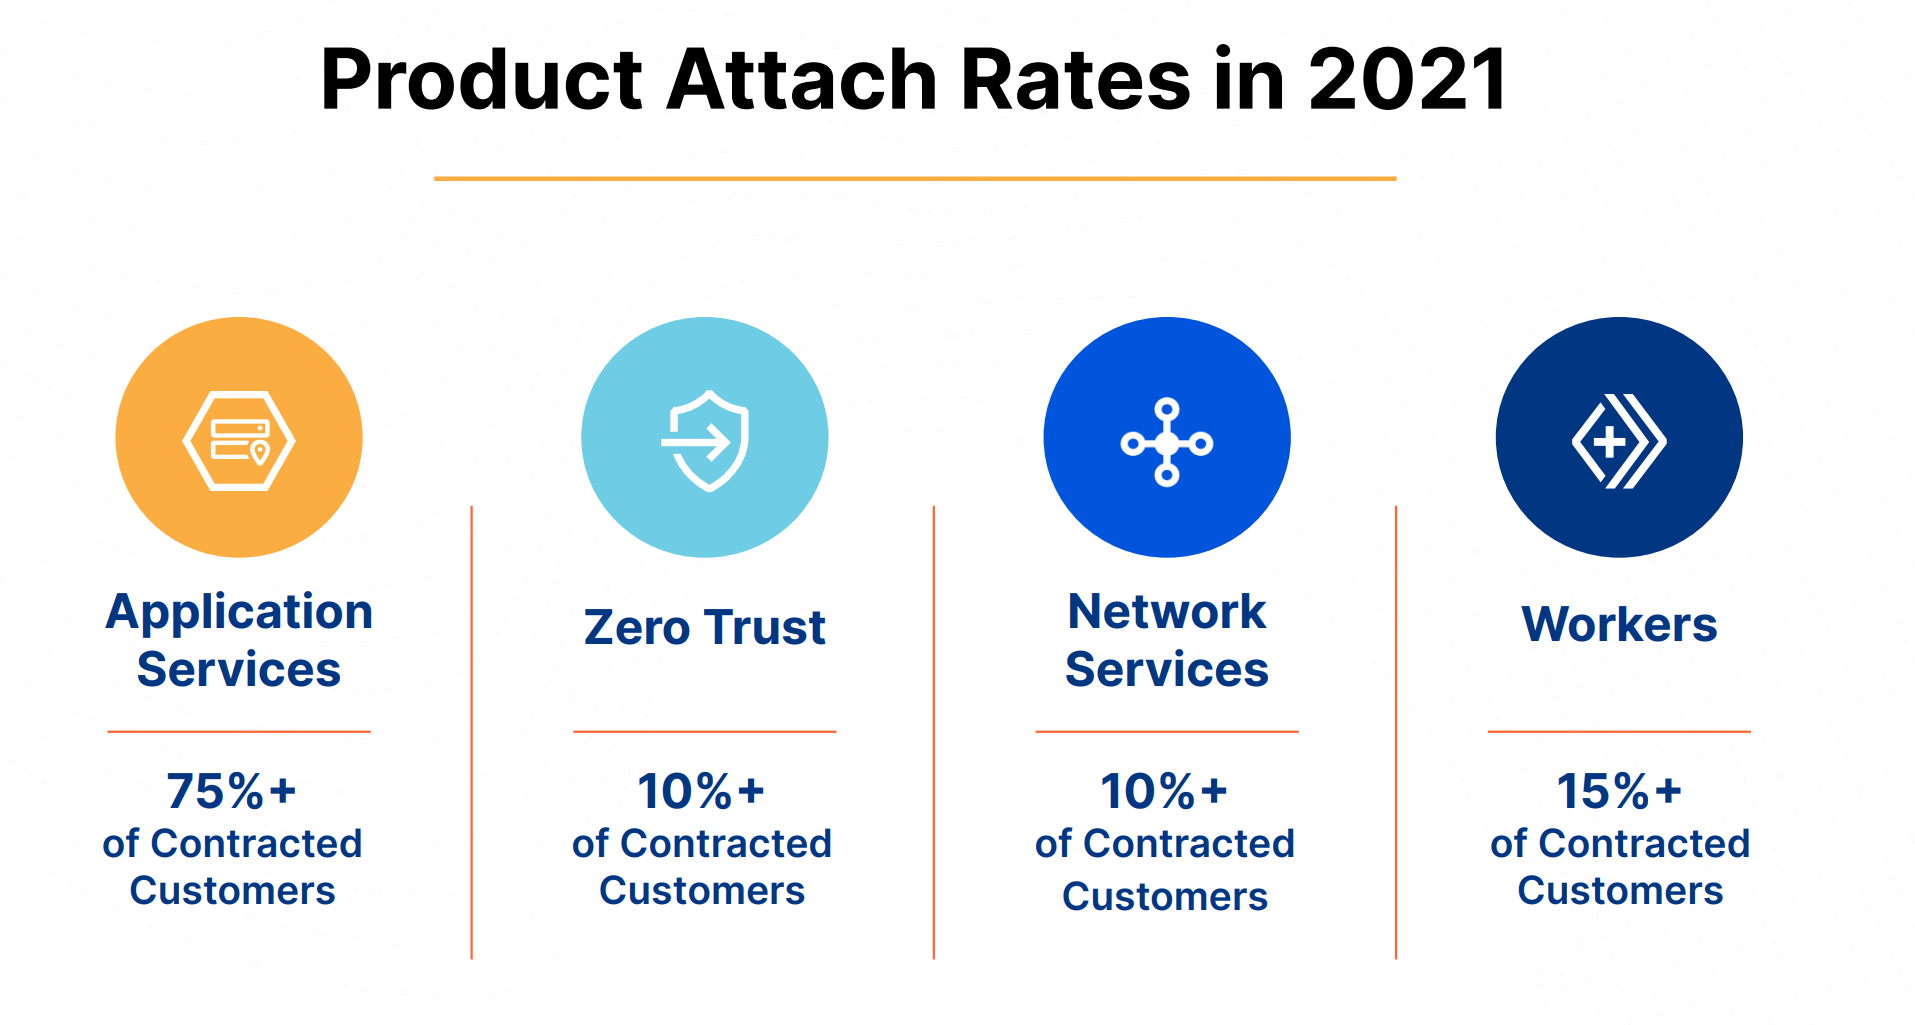 Product Attach Rates in 2021